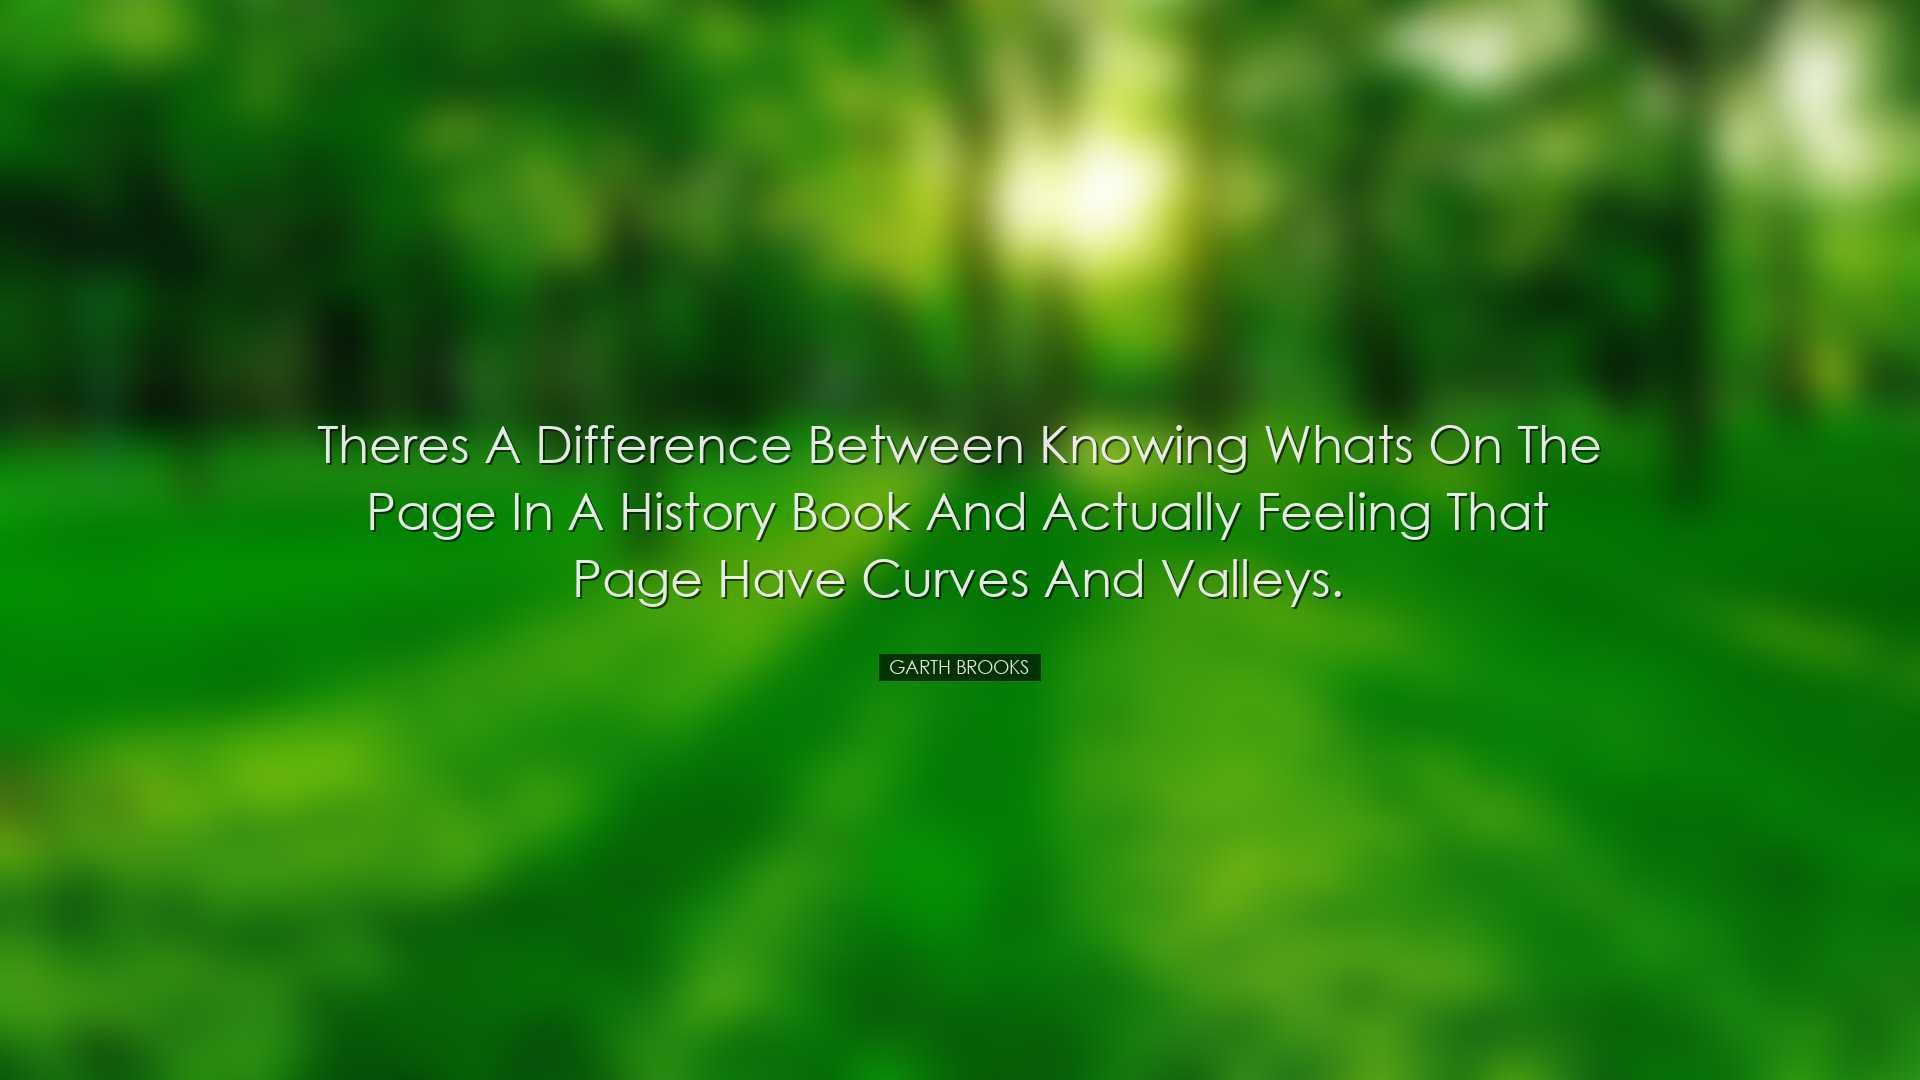 Theres a difference between knowing whats on the page in a history